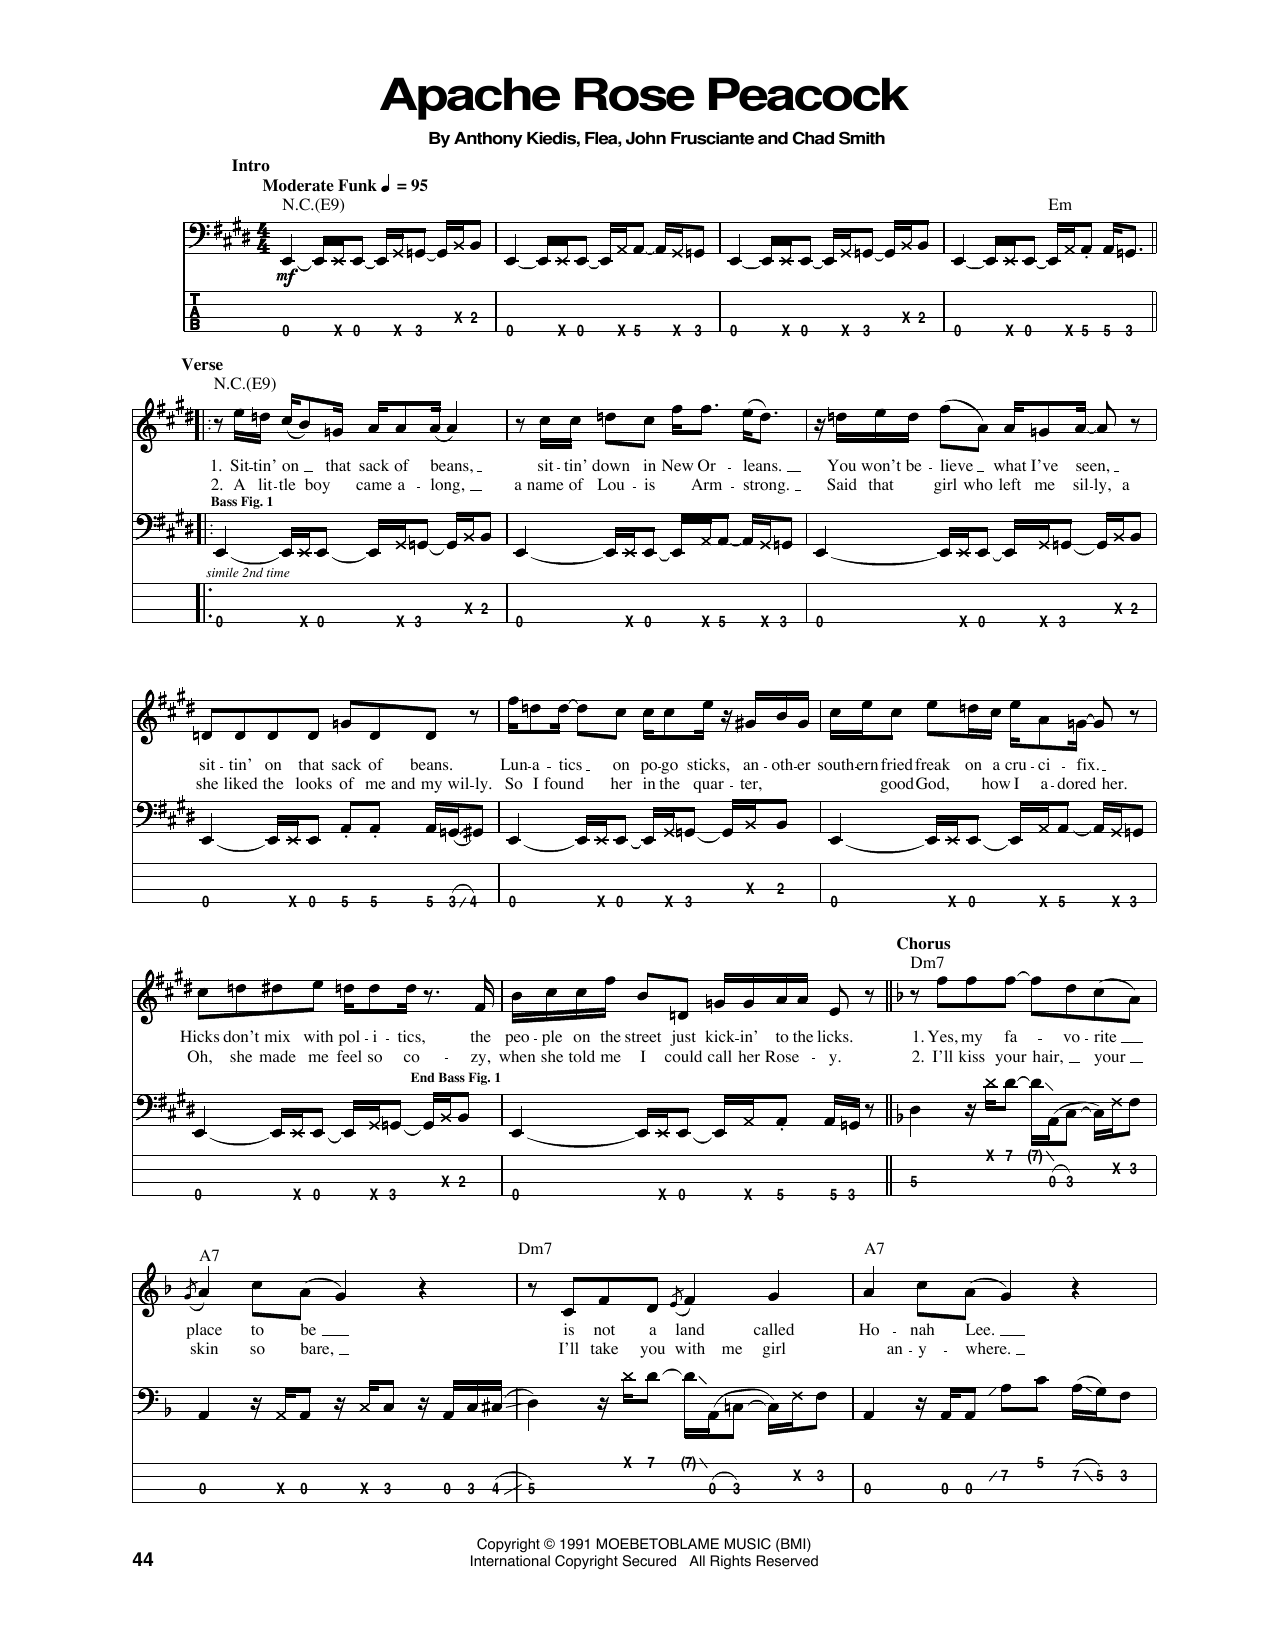 Download Red Hot Chili Peppers Apache Rose Peacock Sheet Music